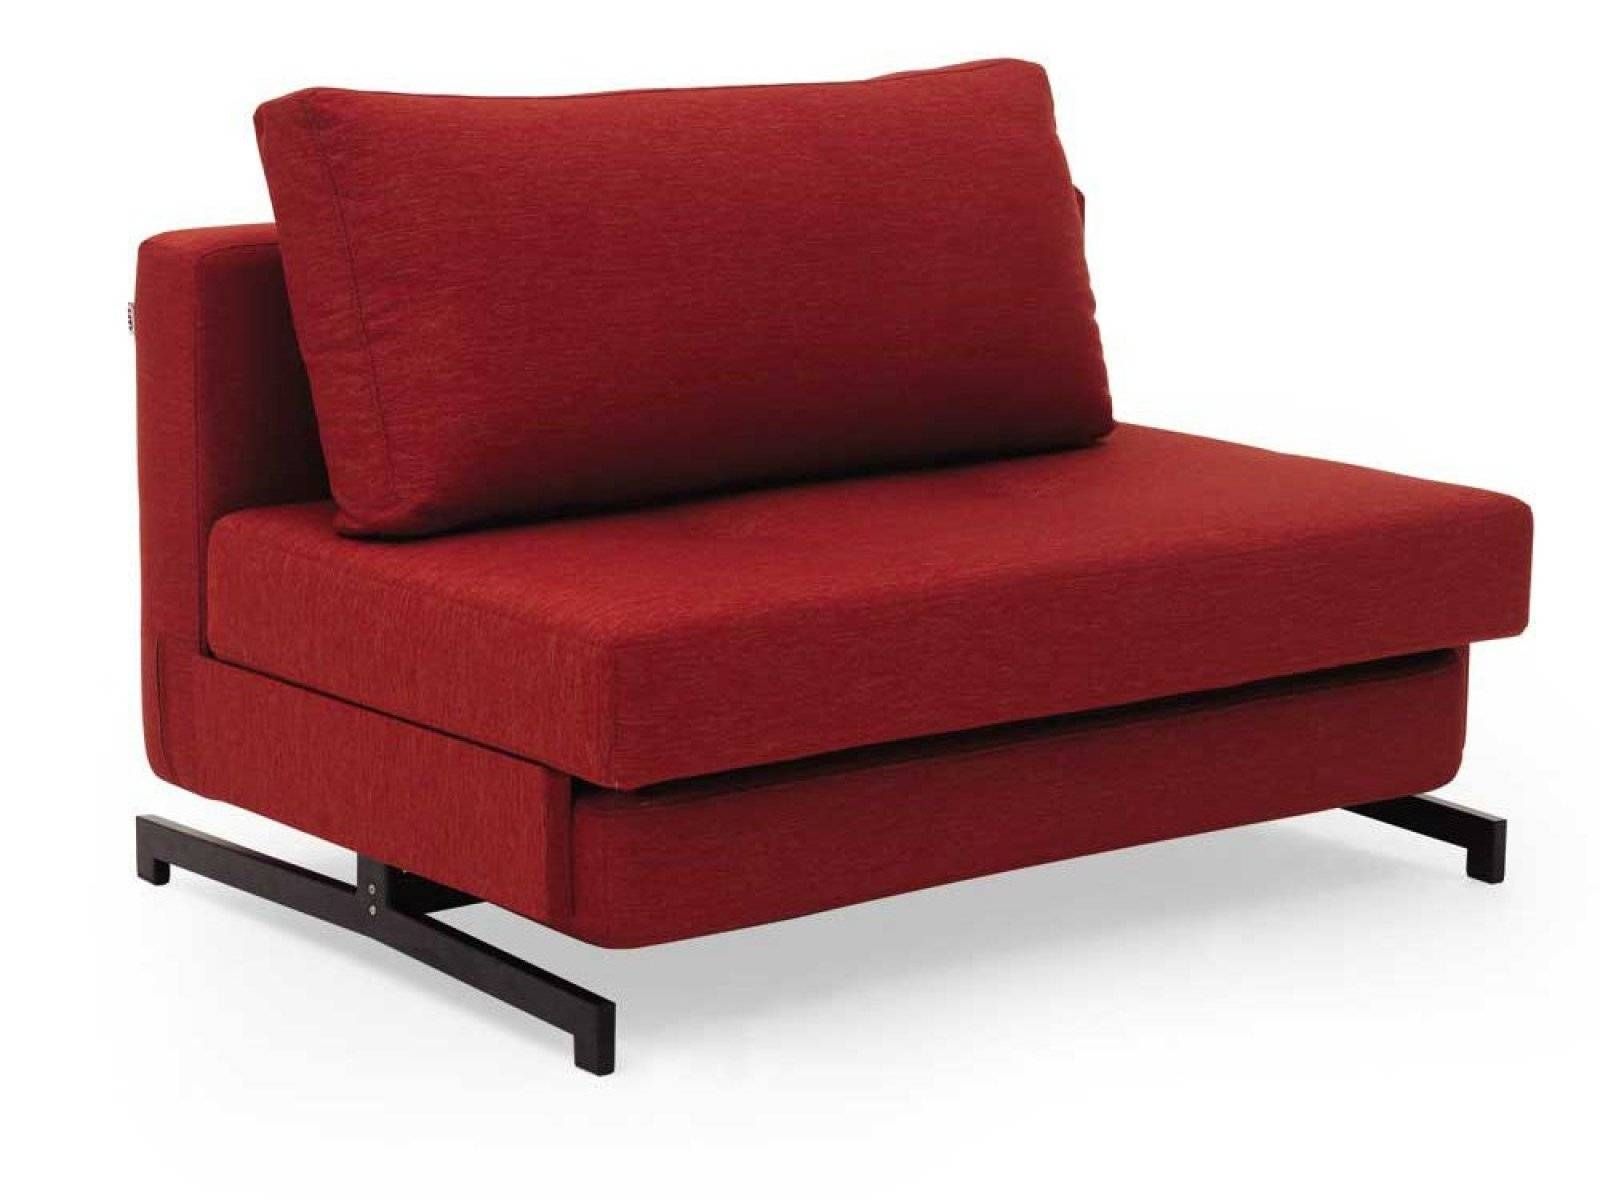 ▻ Sofa : 5 Lovable Single Sofa Sleeper Lovely Cheap Furniture Intended For Cheap Sofa Beds (View 26 of 30)